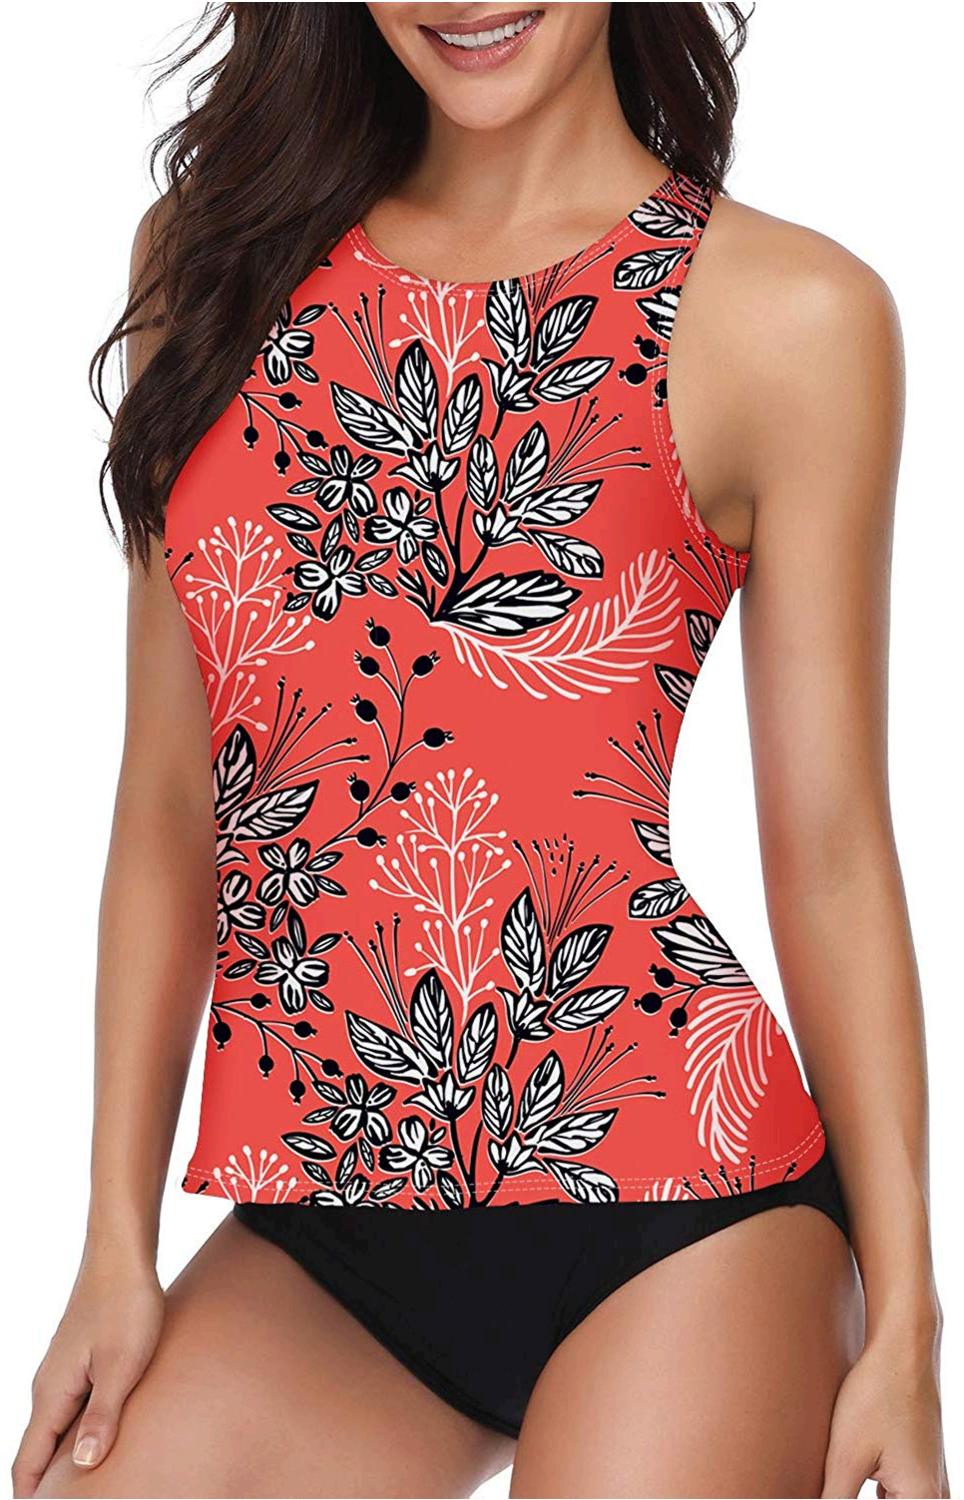 Women Two Piece Swimsuit High Neck Halter Floral Printed, Red, Size 4.0 ...